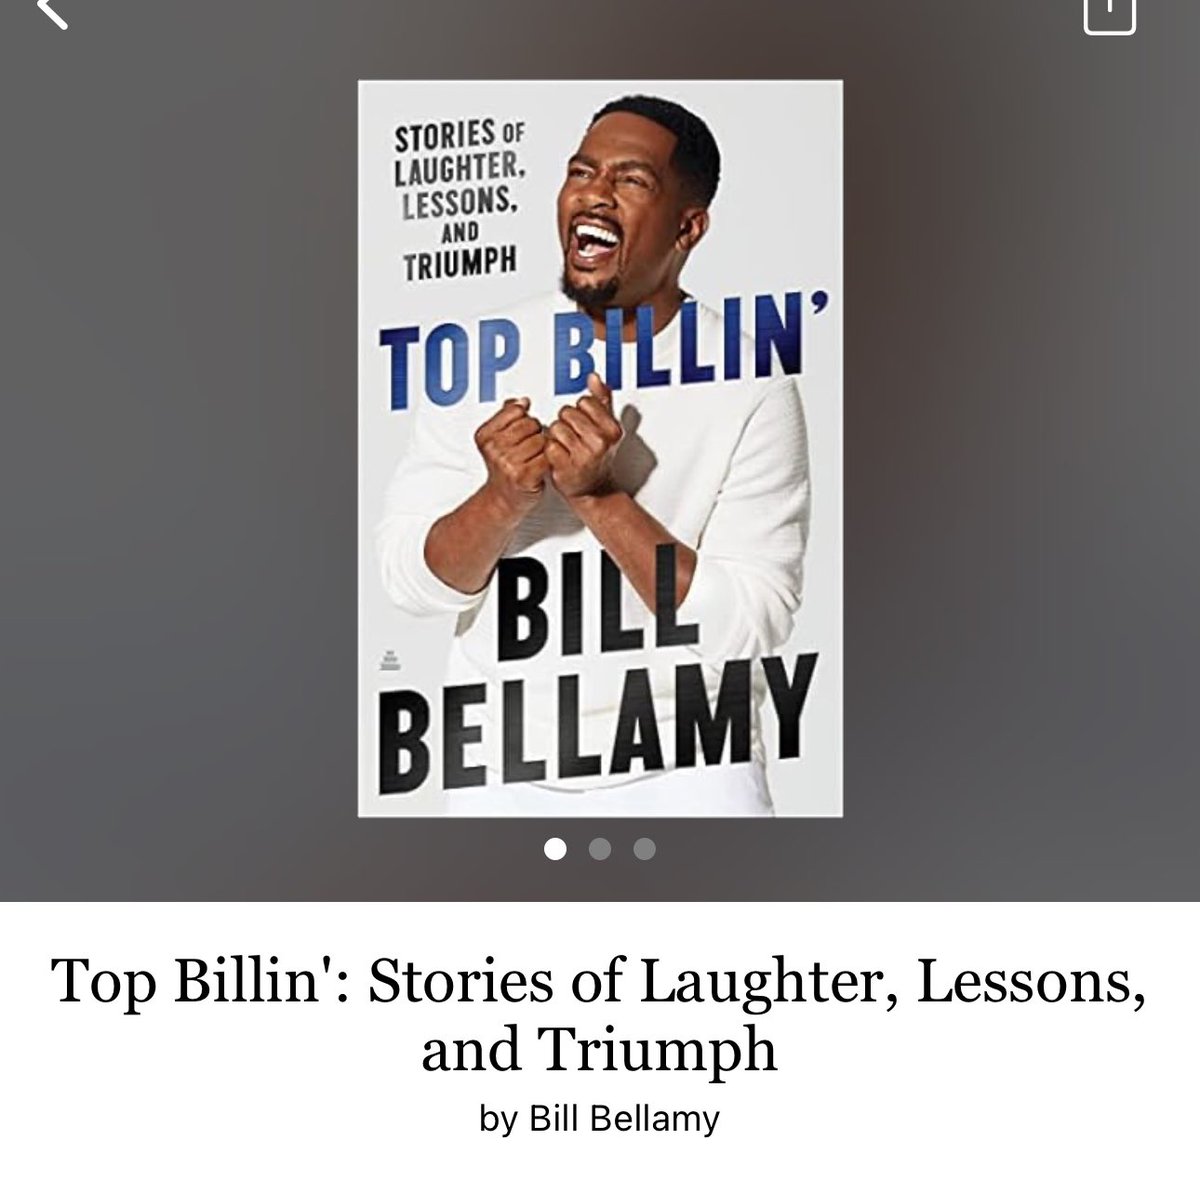 Top Billin' by Bill Bellamy 

#TopBillin by #BillBellamy #6236 #26chapters #257pages #385of400 #7houraudiobook #22for6 #april2024 #clearingoffreadingshelves #whatsnext #readitquick